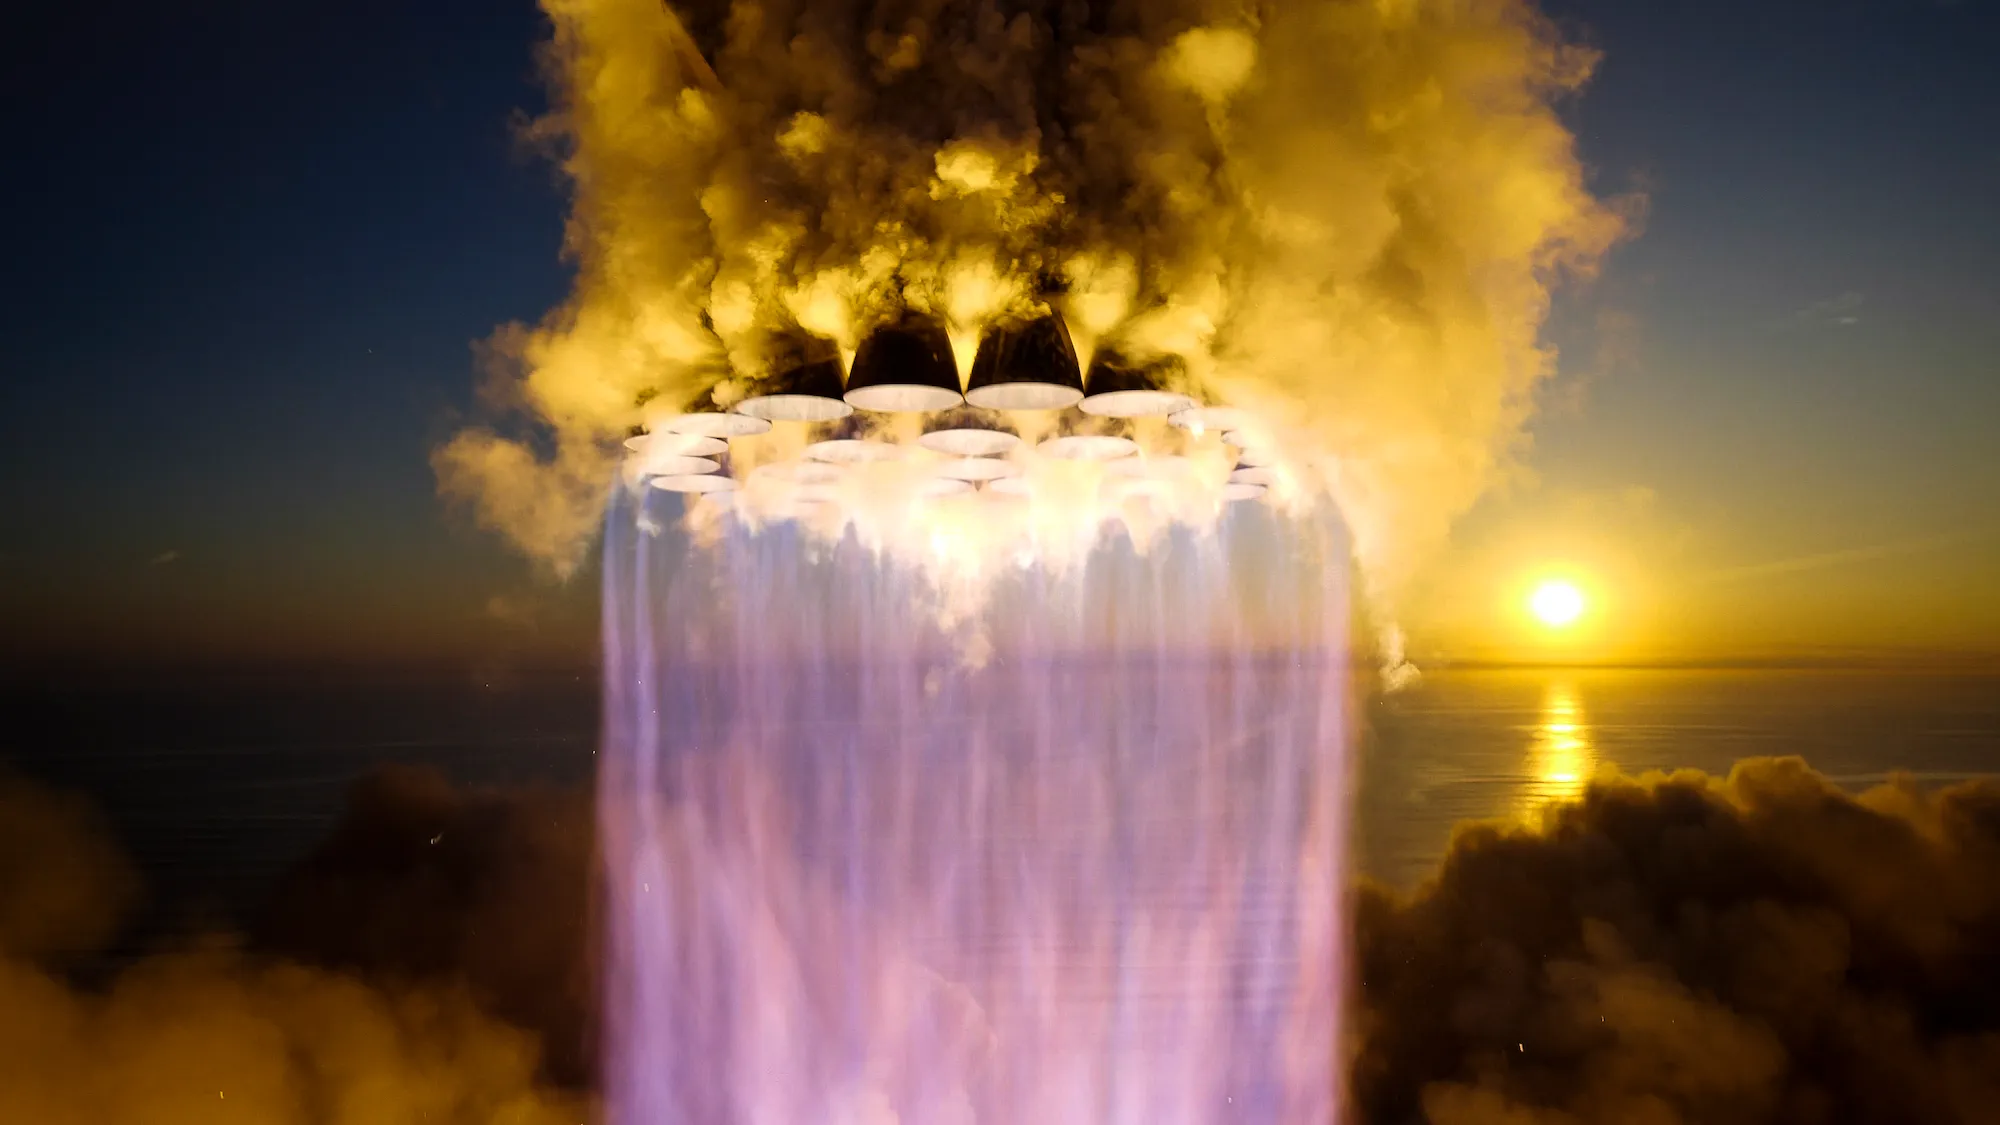 Another SpaceX Starship blew up